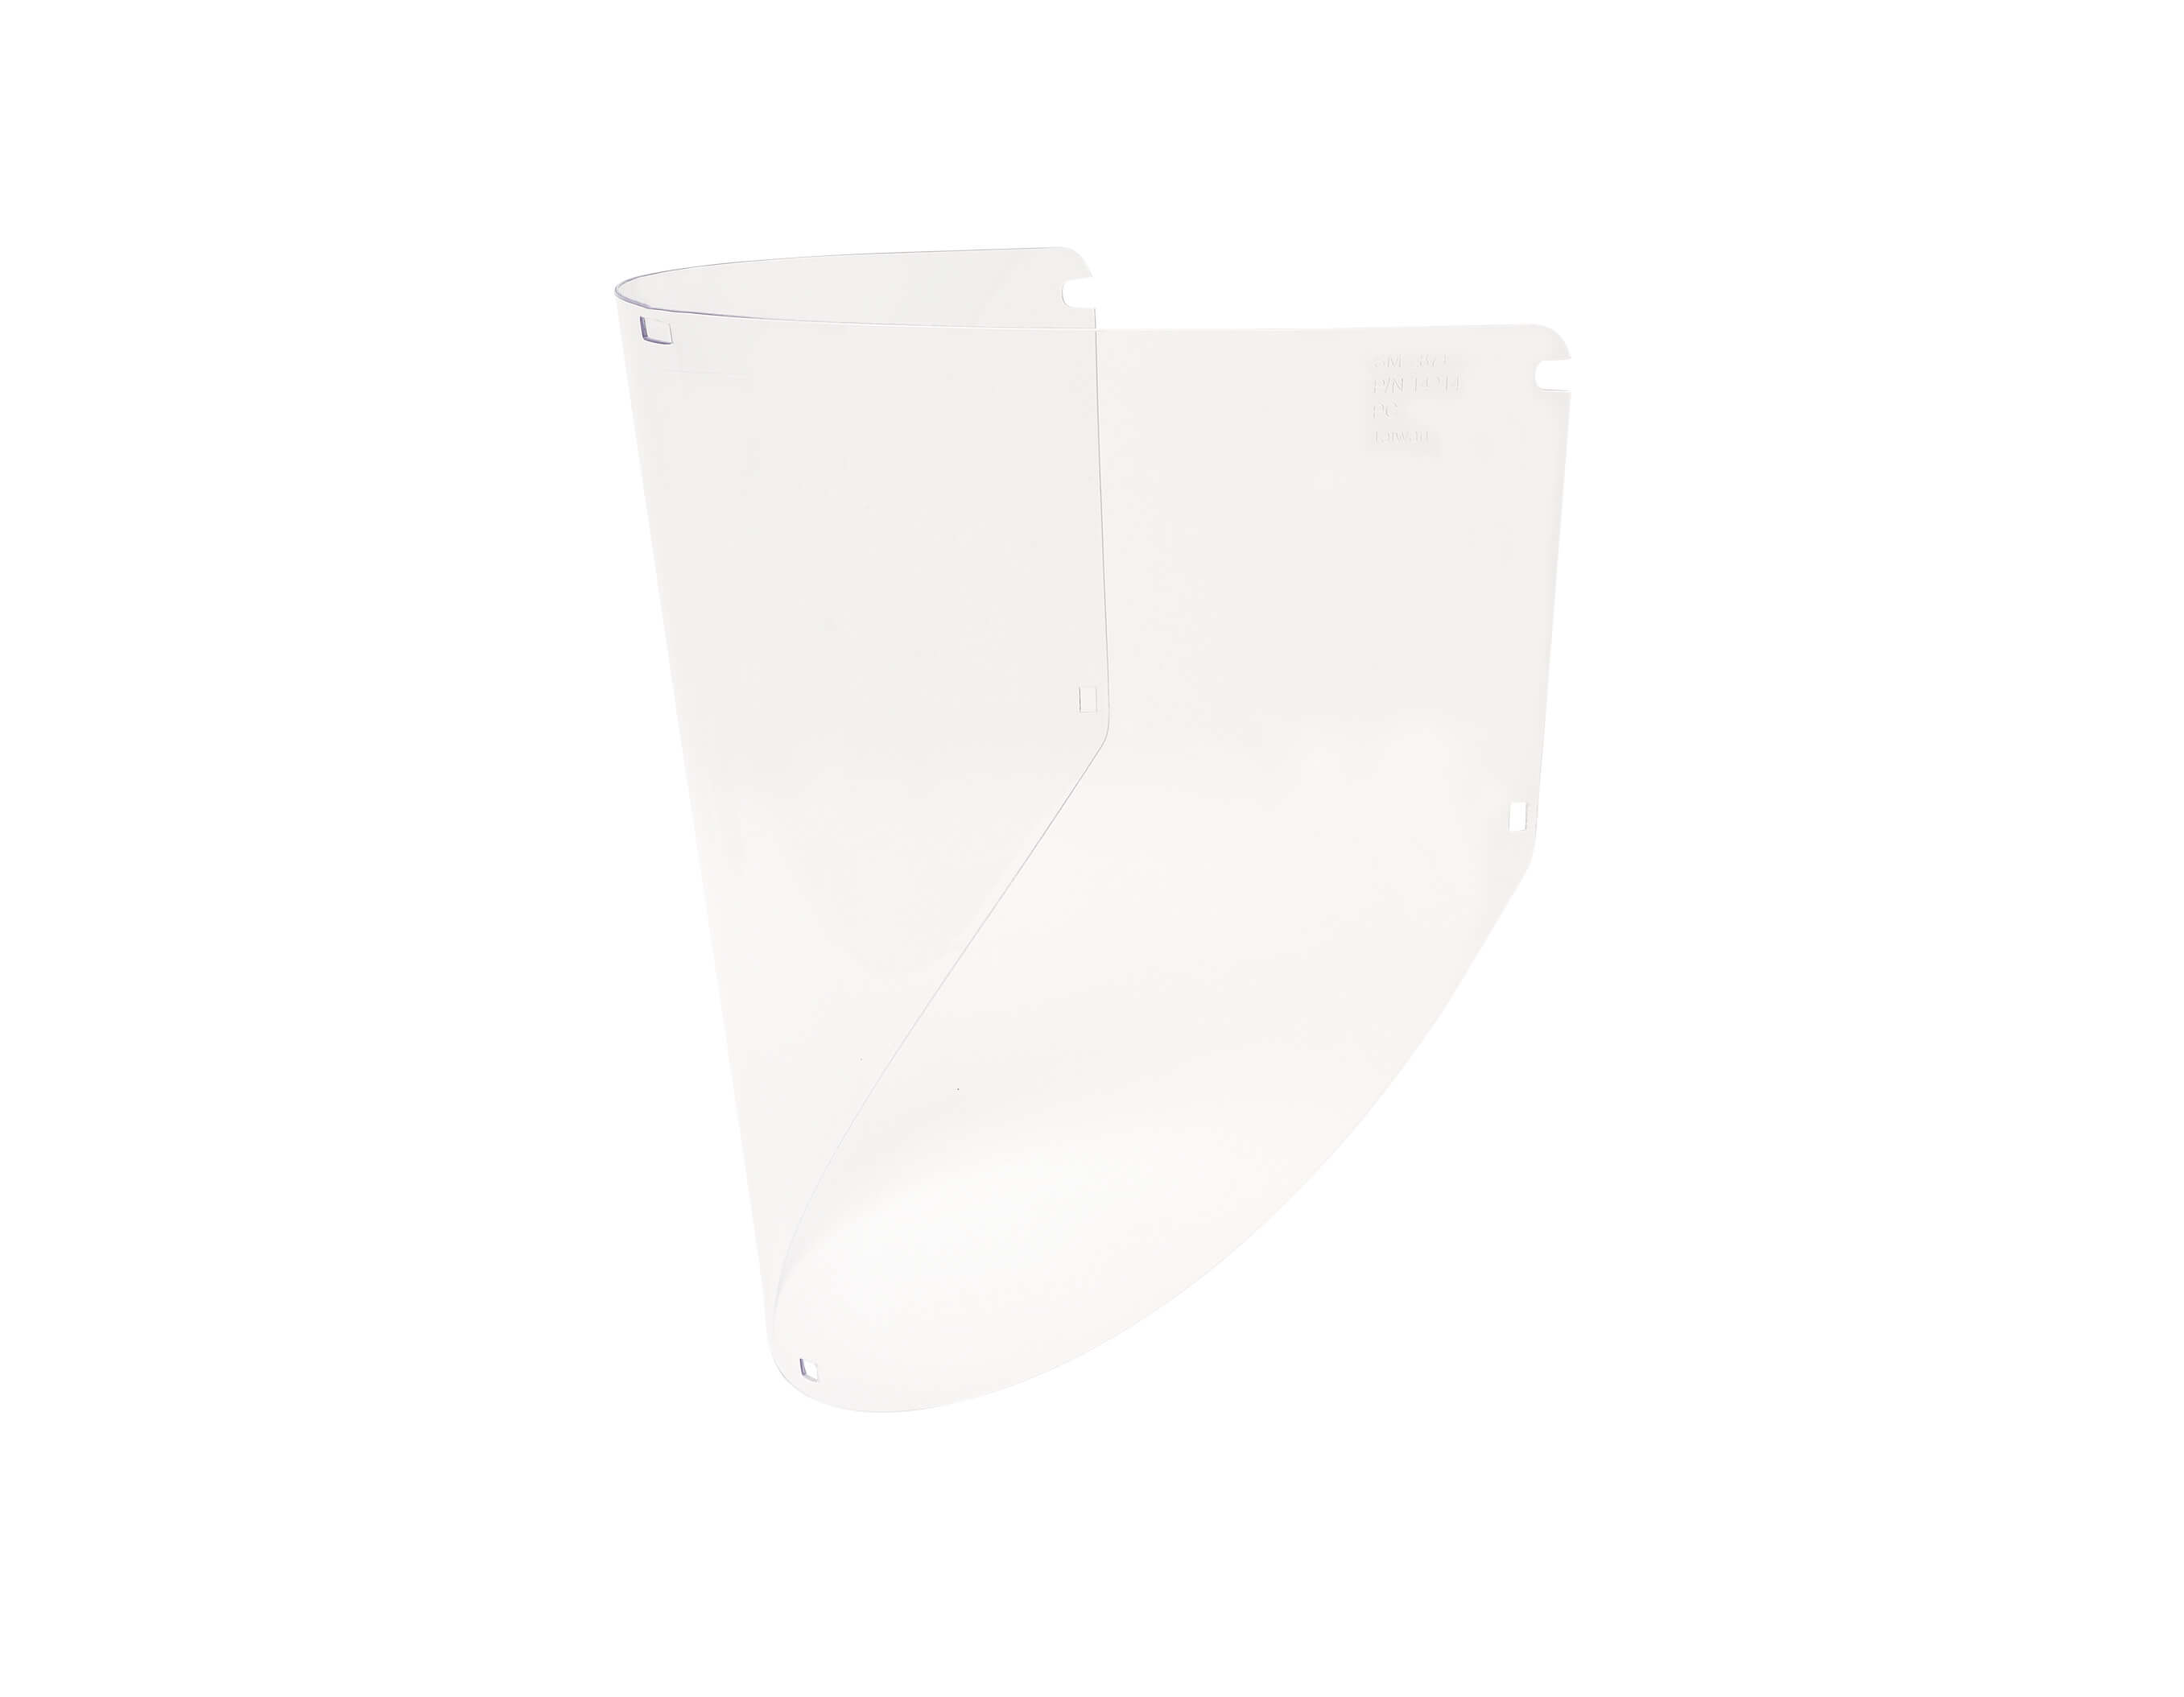 REPLACEMENT LENS FOR FACE SHIELD 984.14200